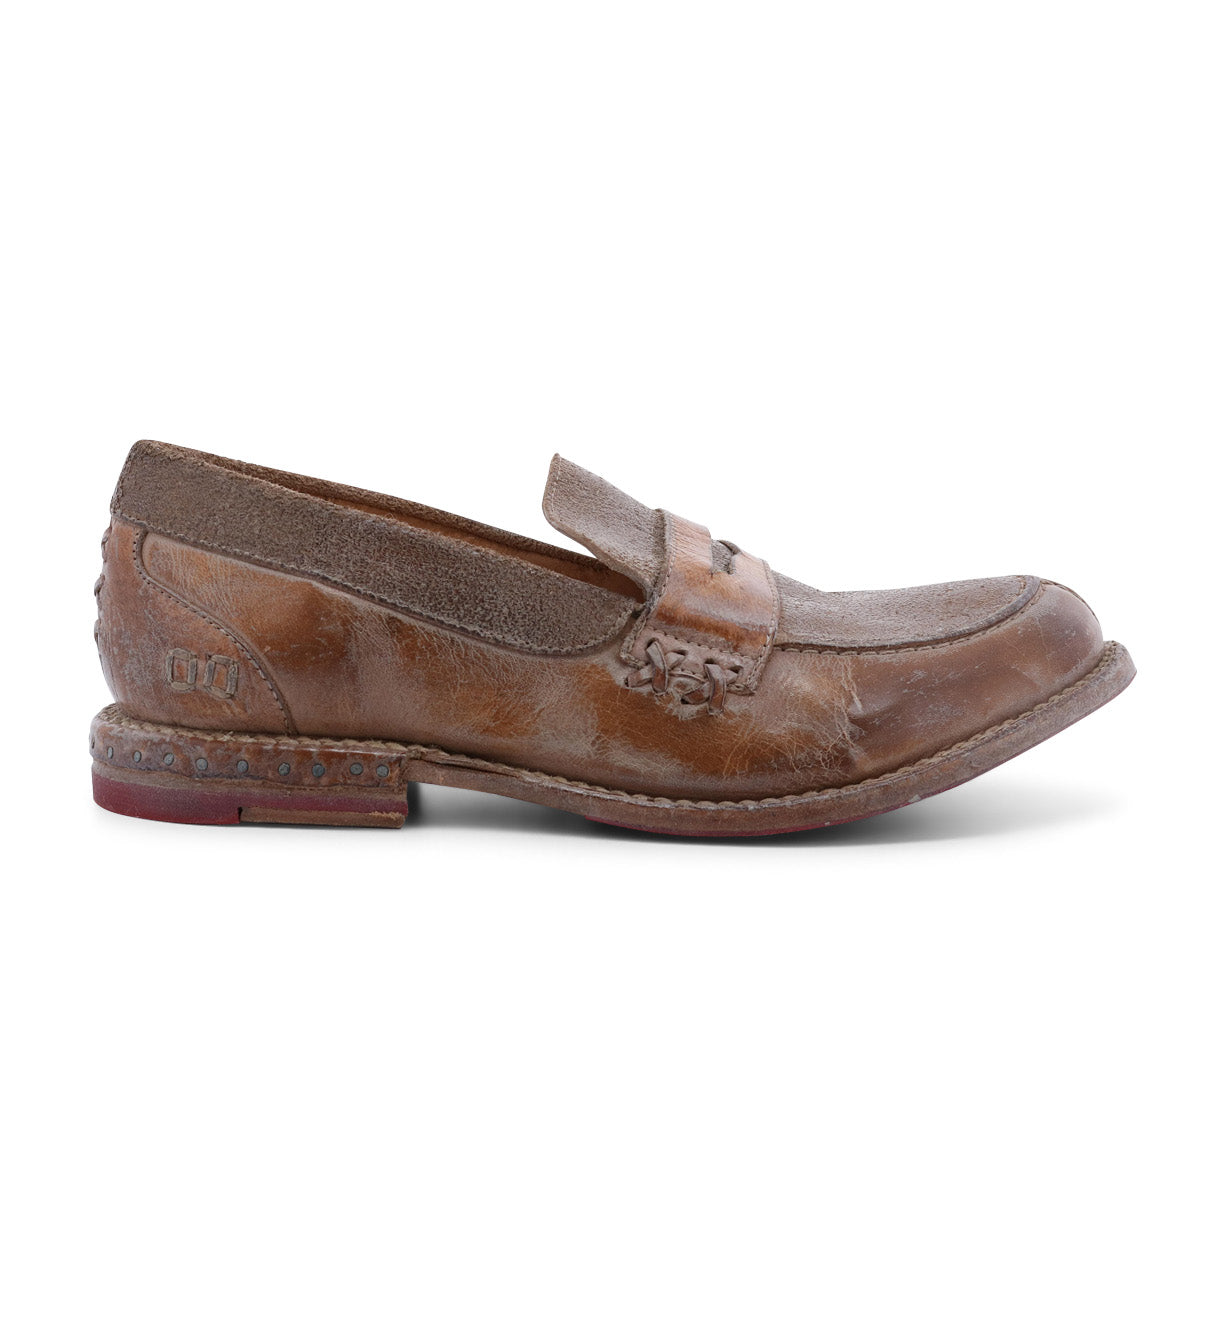 A women's brown loafer with a red sole, the Reina by Bed Stu.